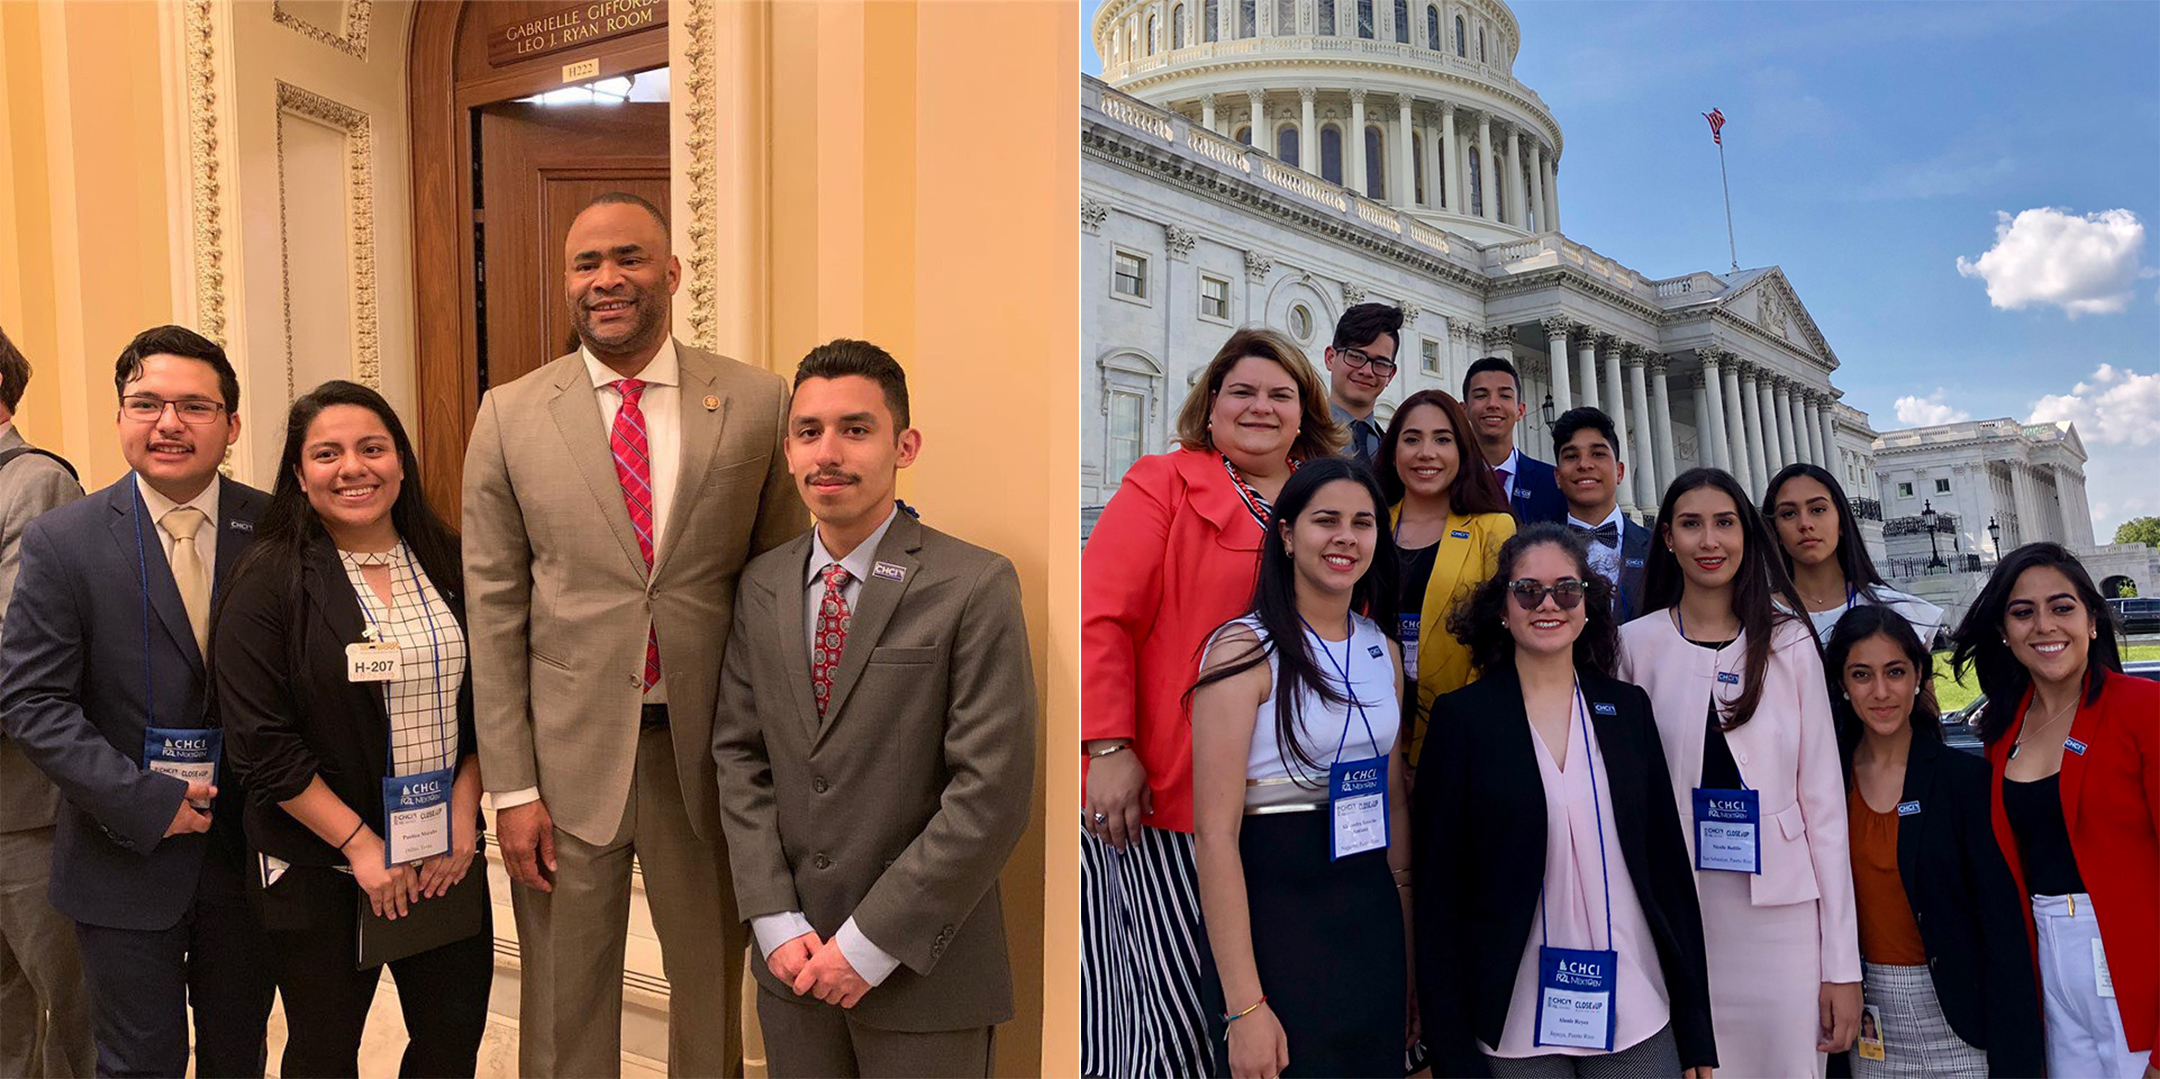 Two photos, side by side, of congresspeople meeting high school students at the U.S. Capitol